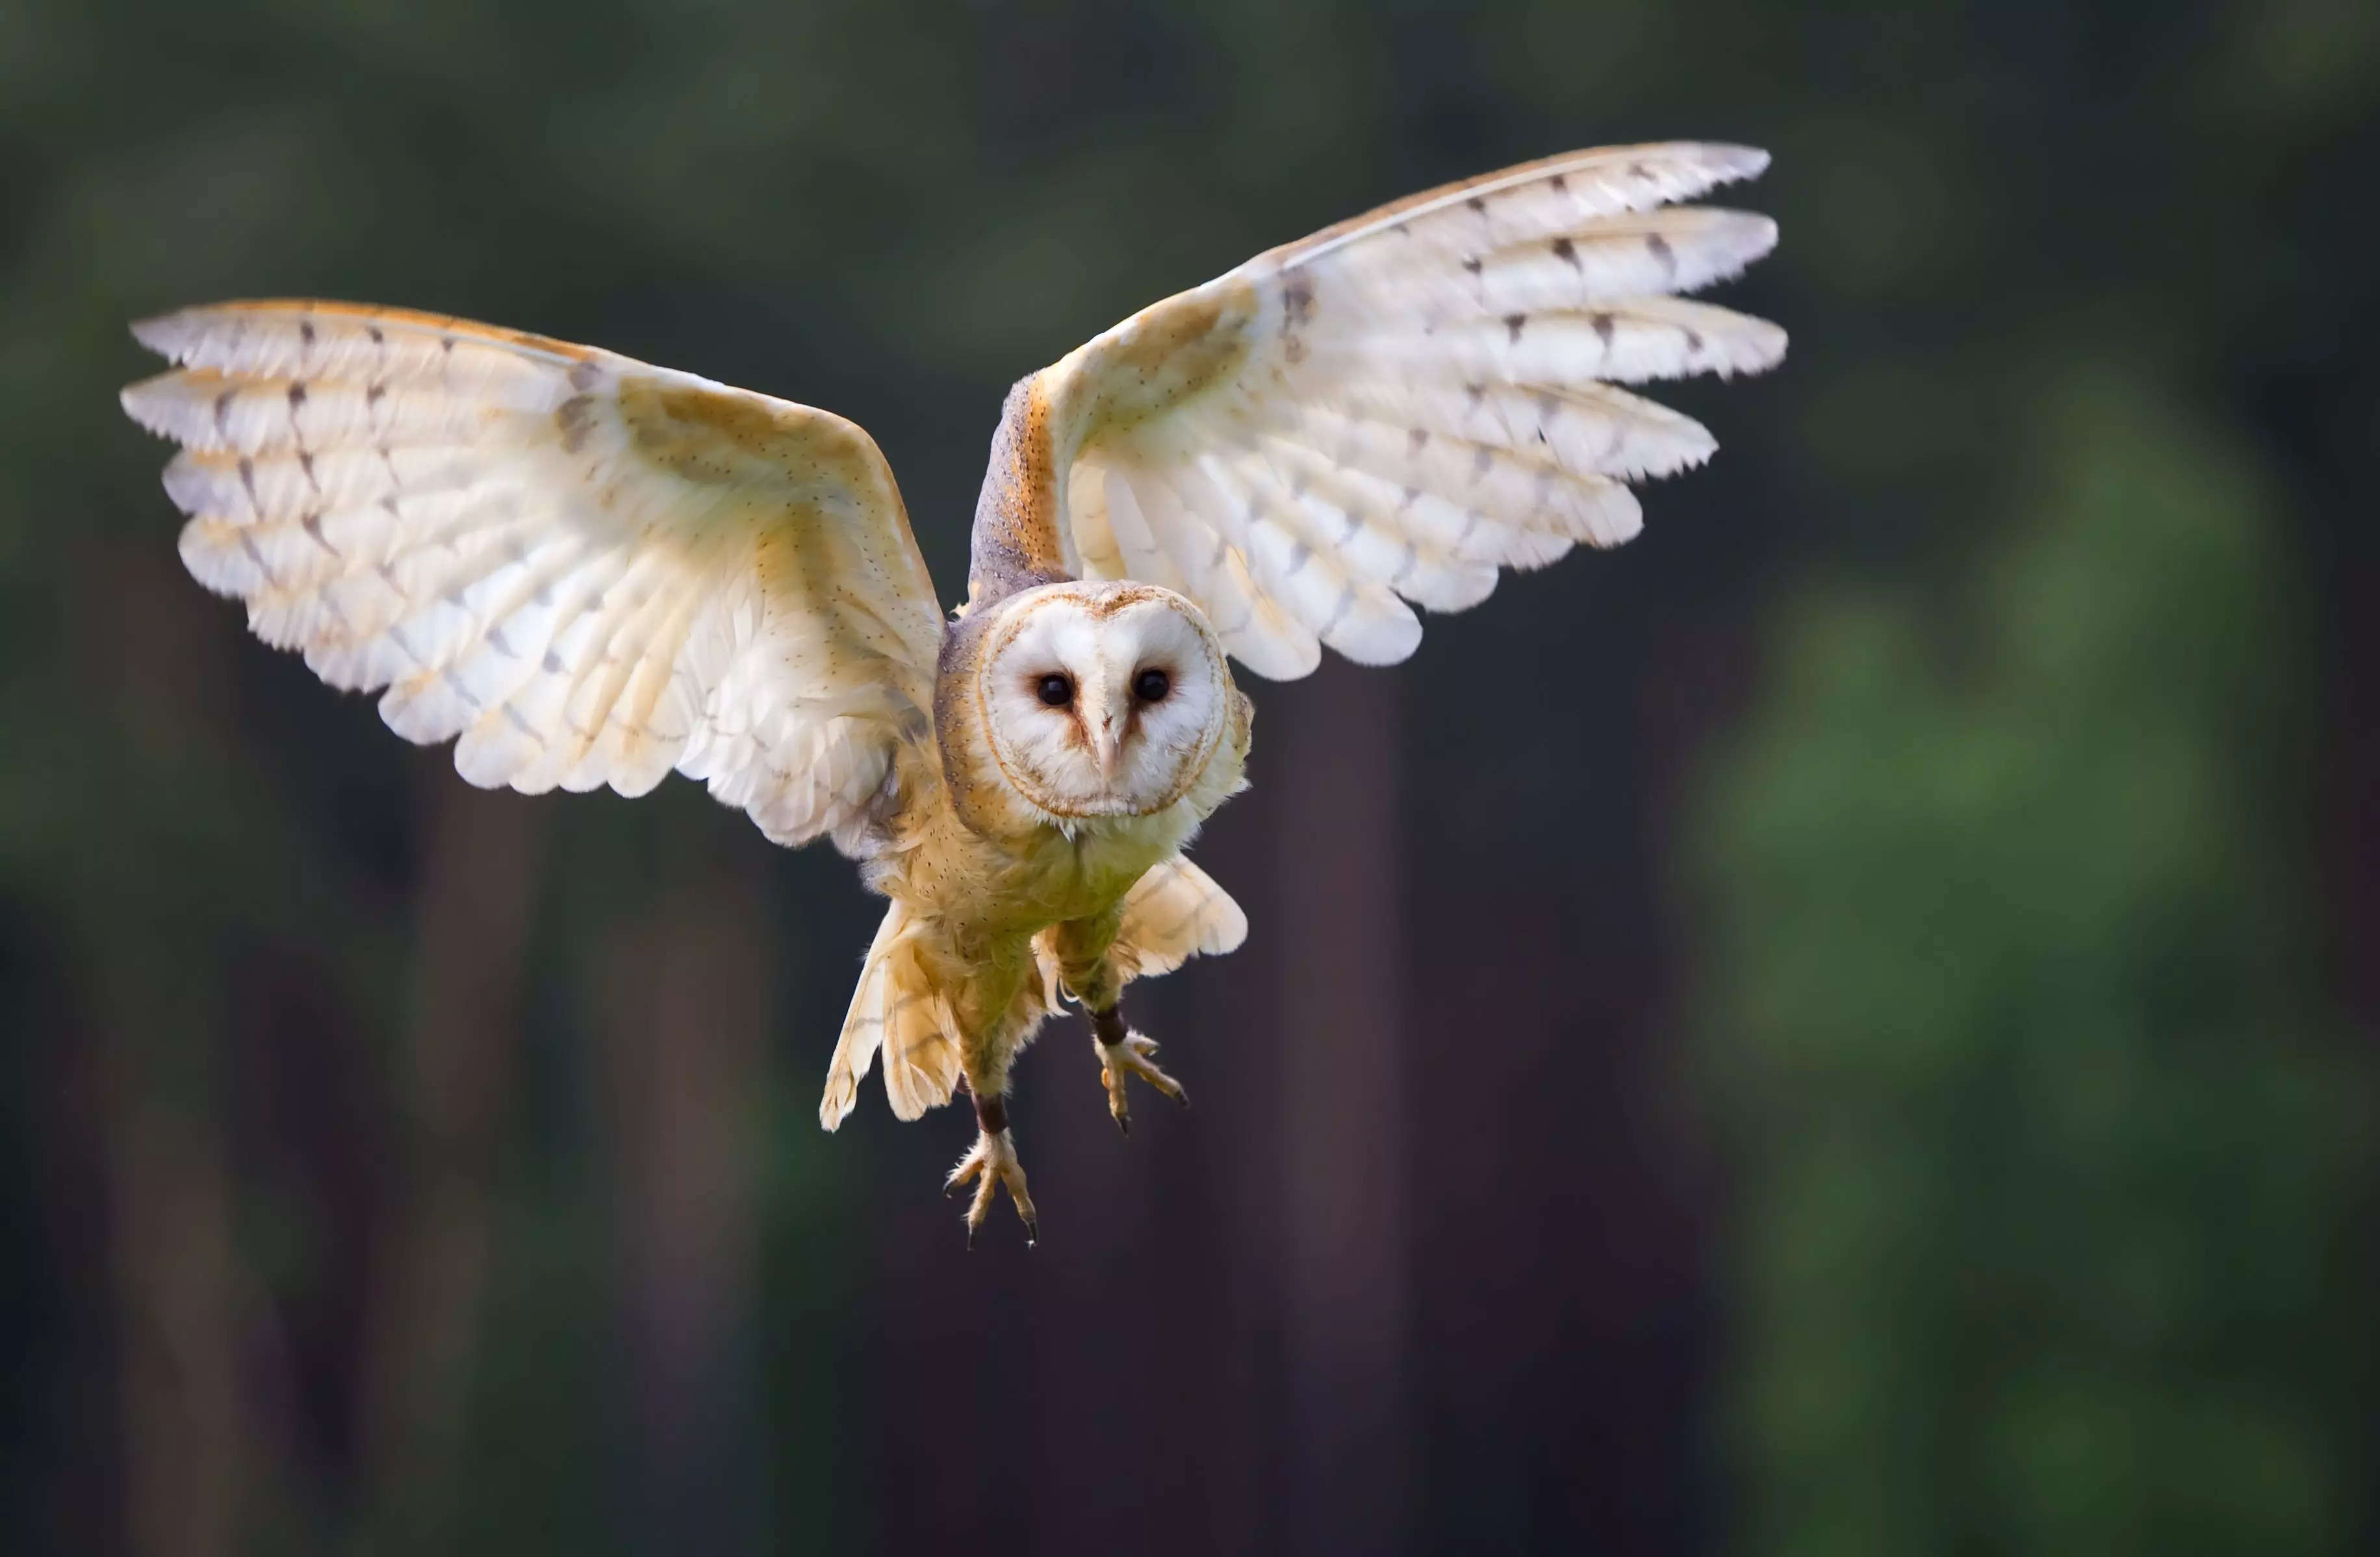 White owl in flight with feathers clearly visible